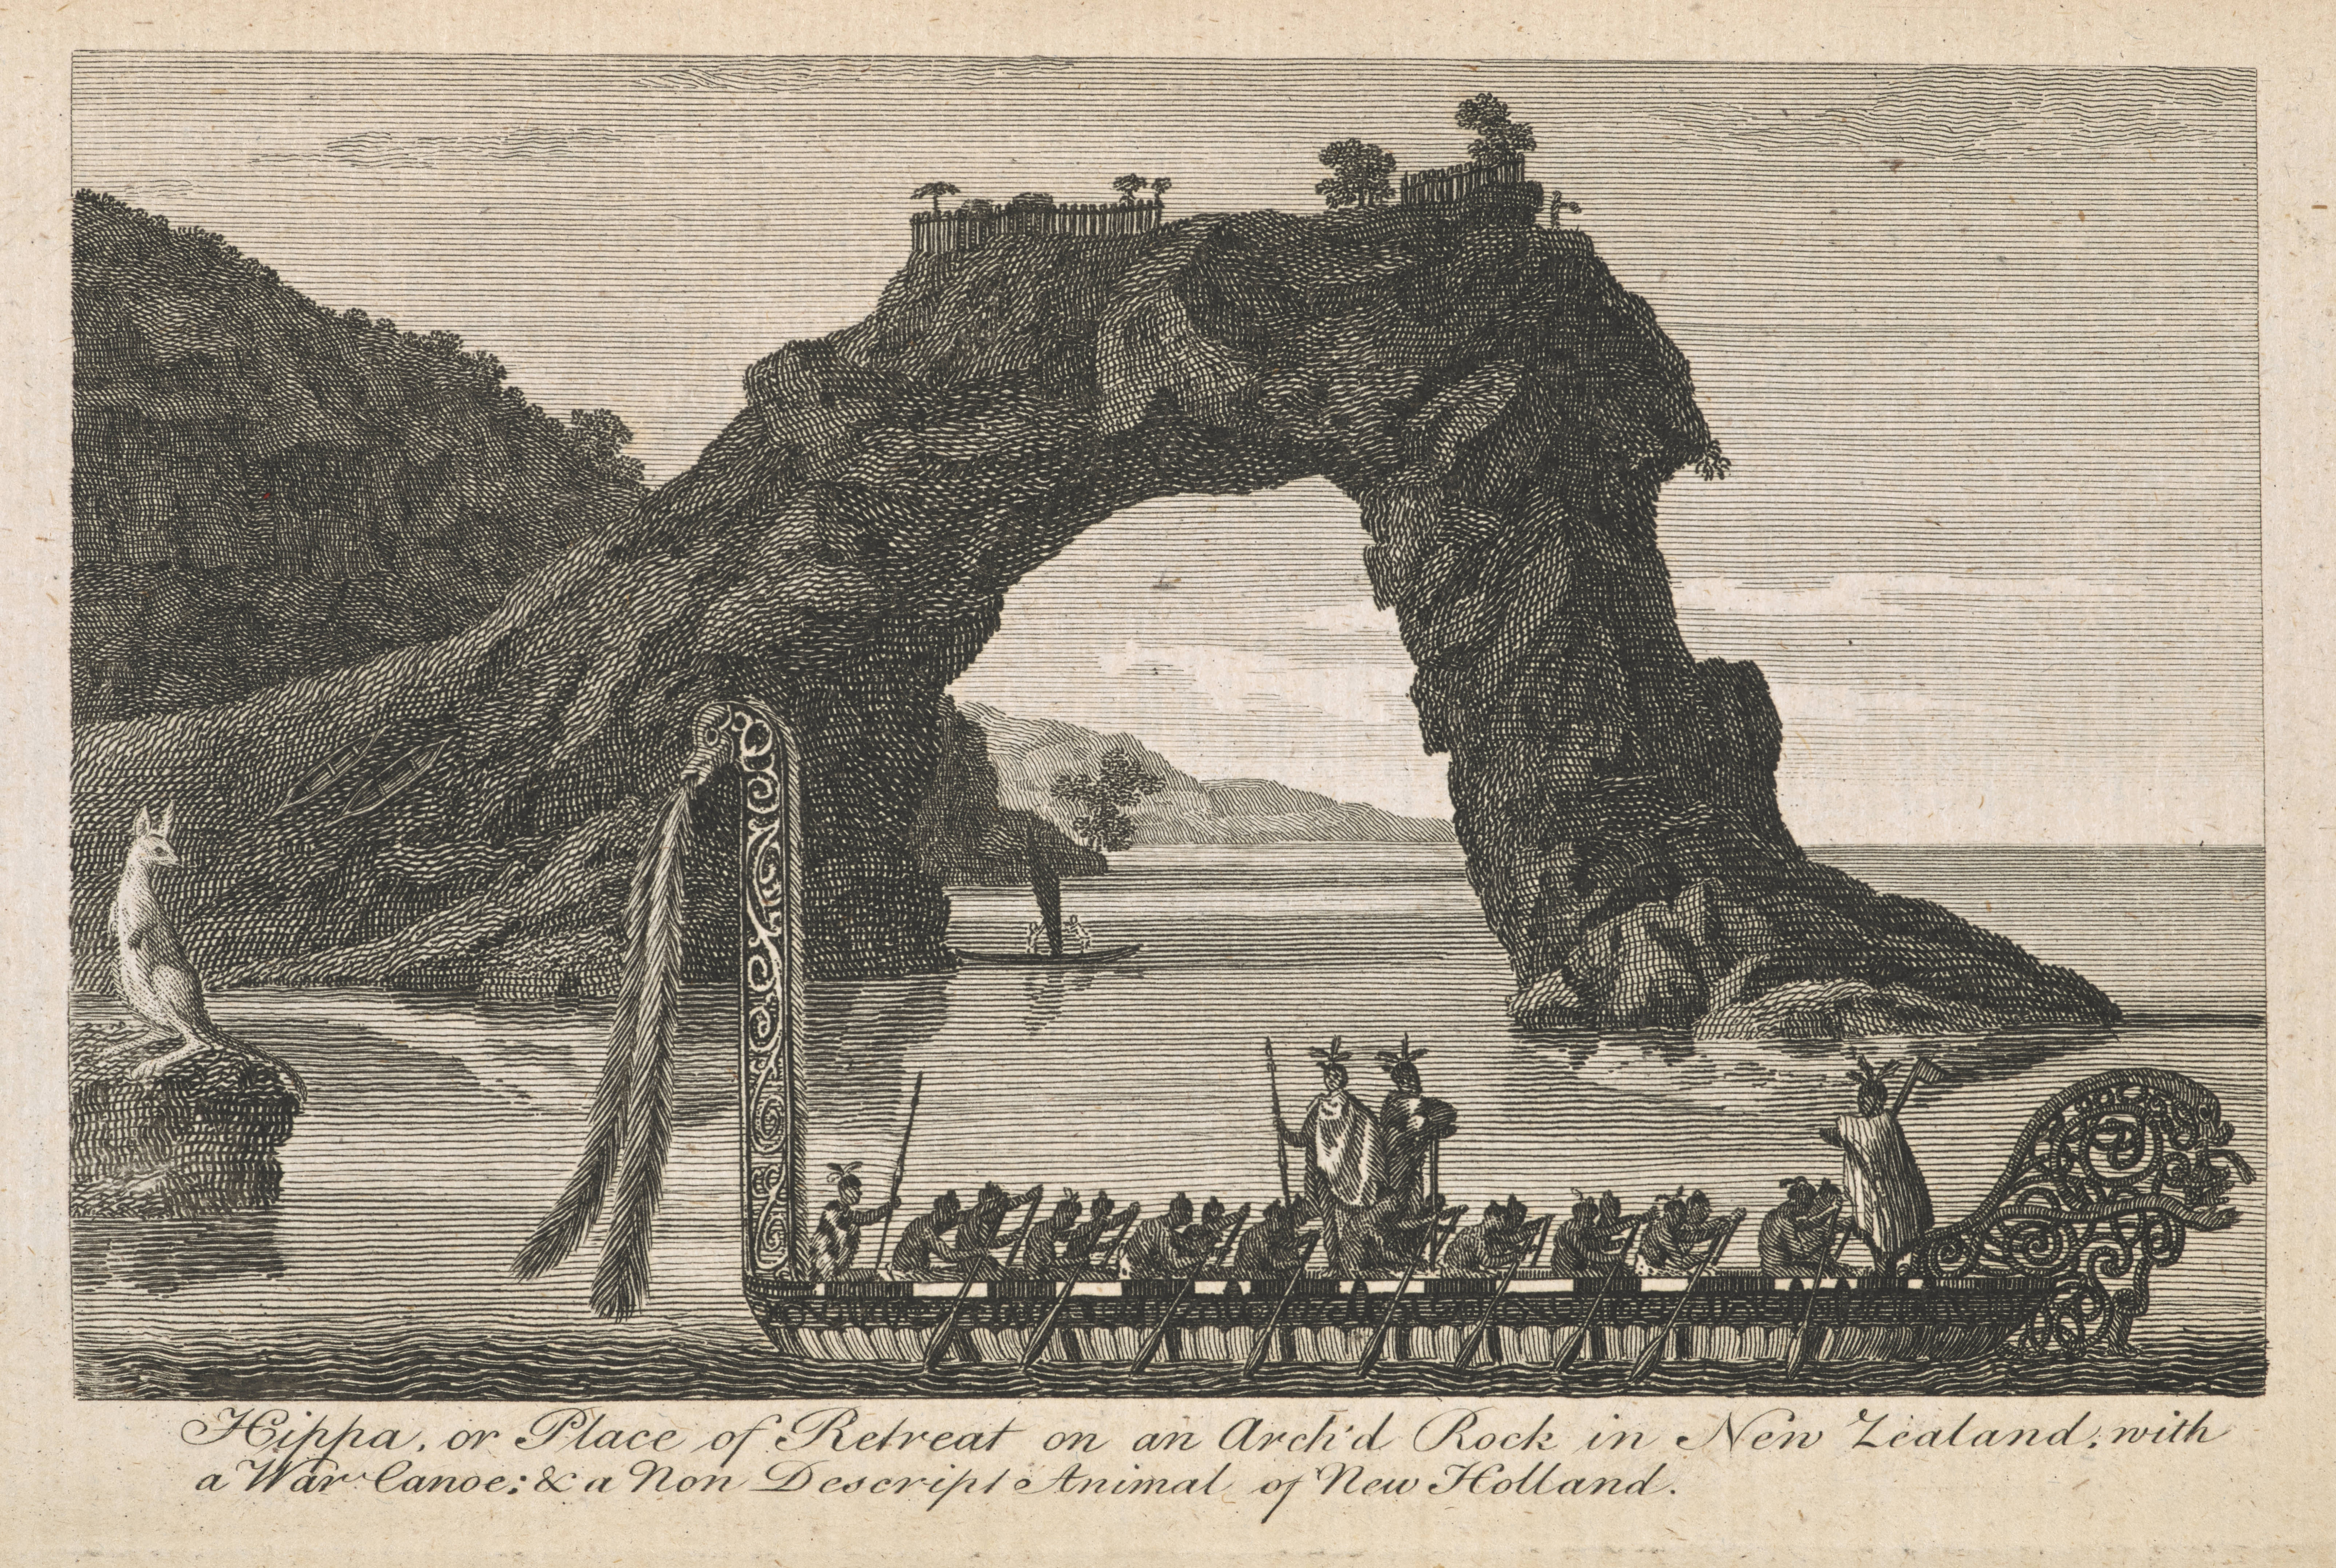 <i>with a War Canoe under a natural-arched Rock</i> from <i>The London Magazine</i>, 42, August 1773, facing p. 369, engraving, 9.5 × 15.4 cm. Collection The British Library (P.P. 5437).